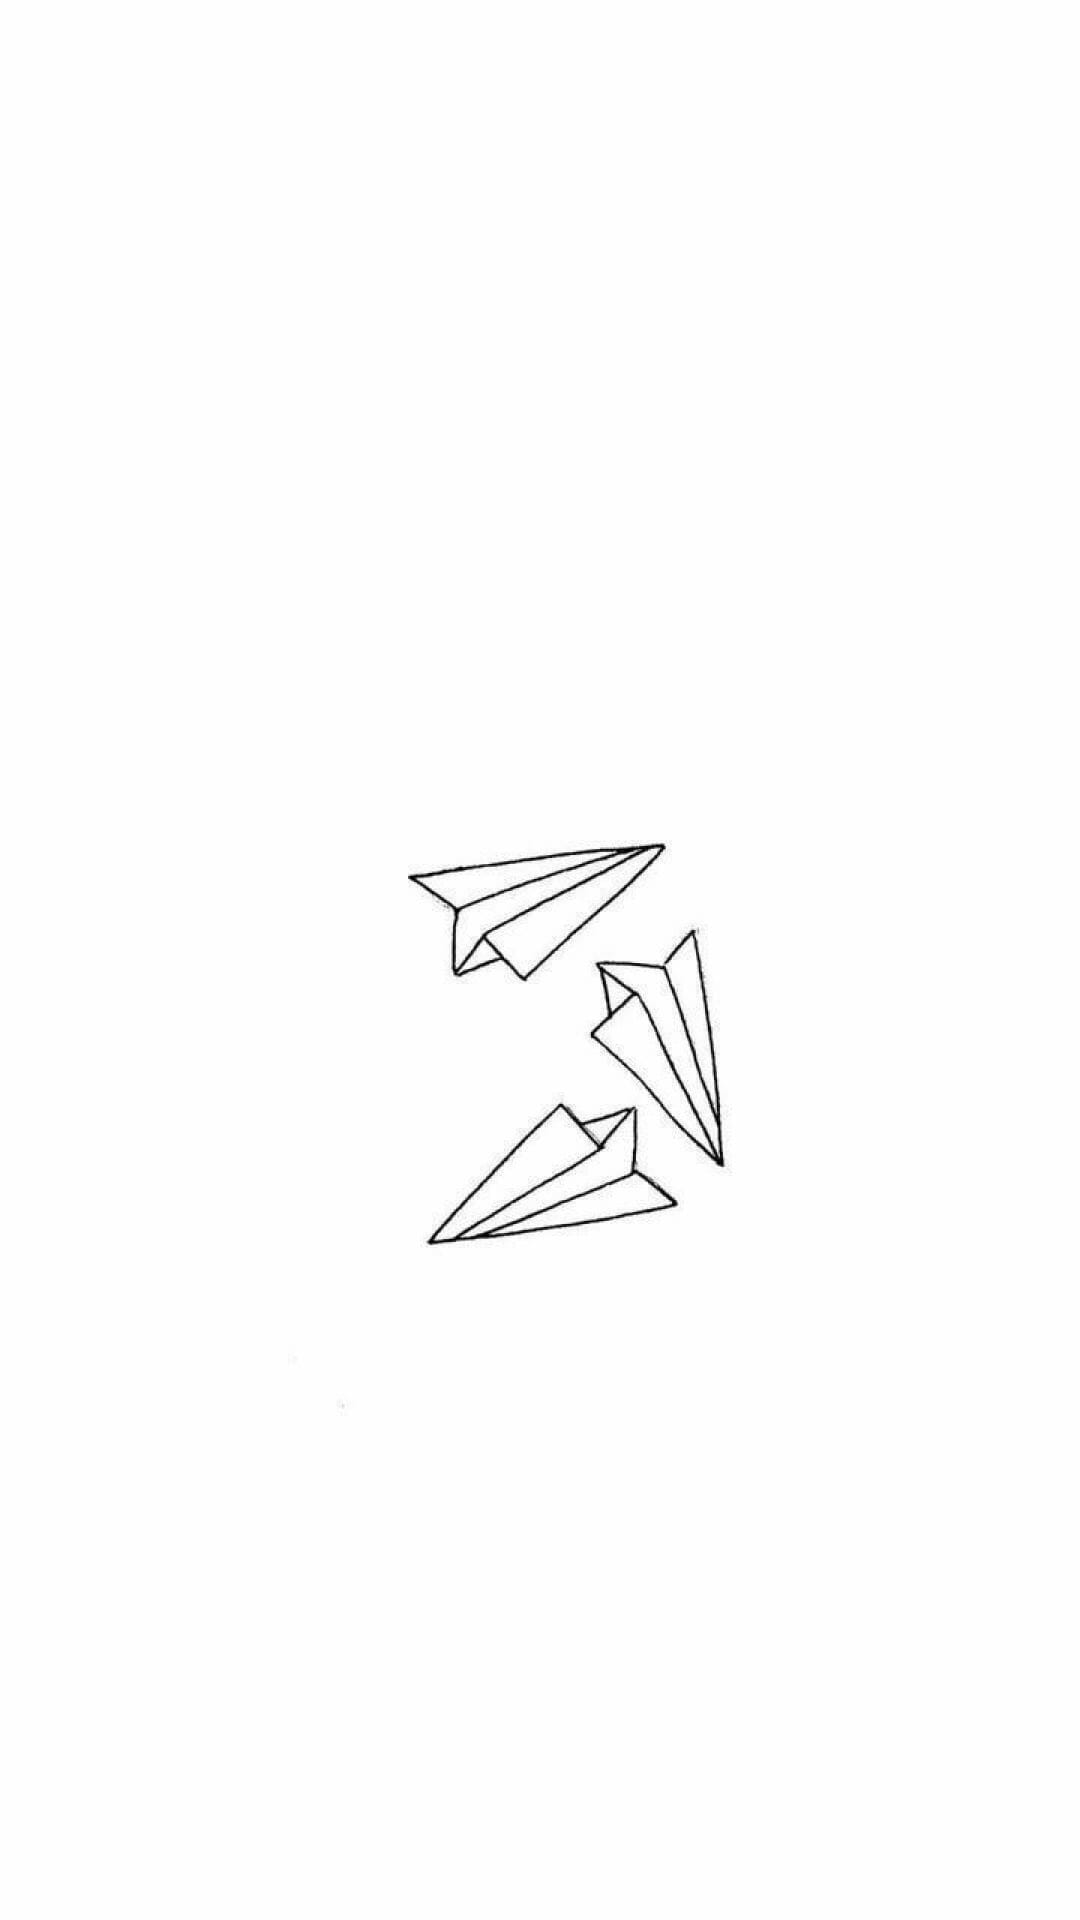 Three paper airplanes flying in the sky - Simple